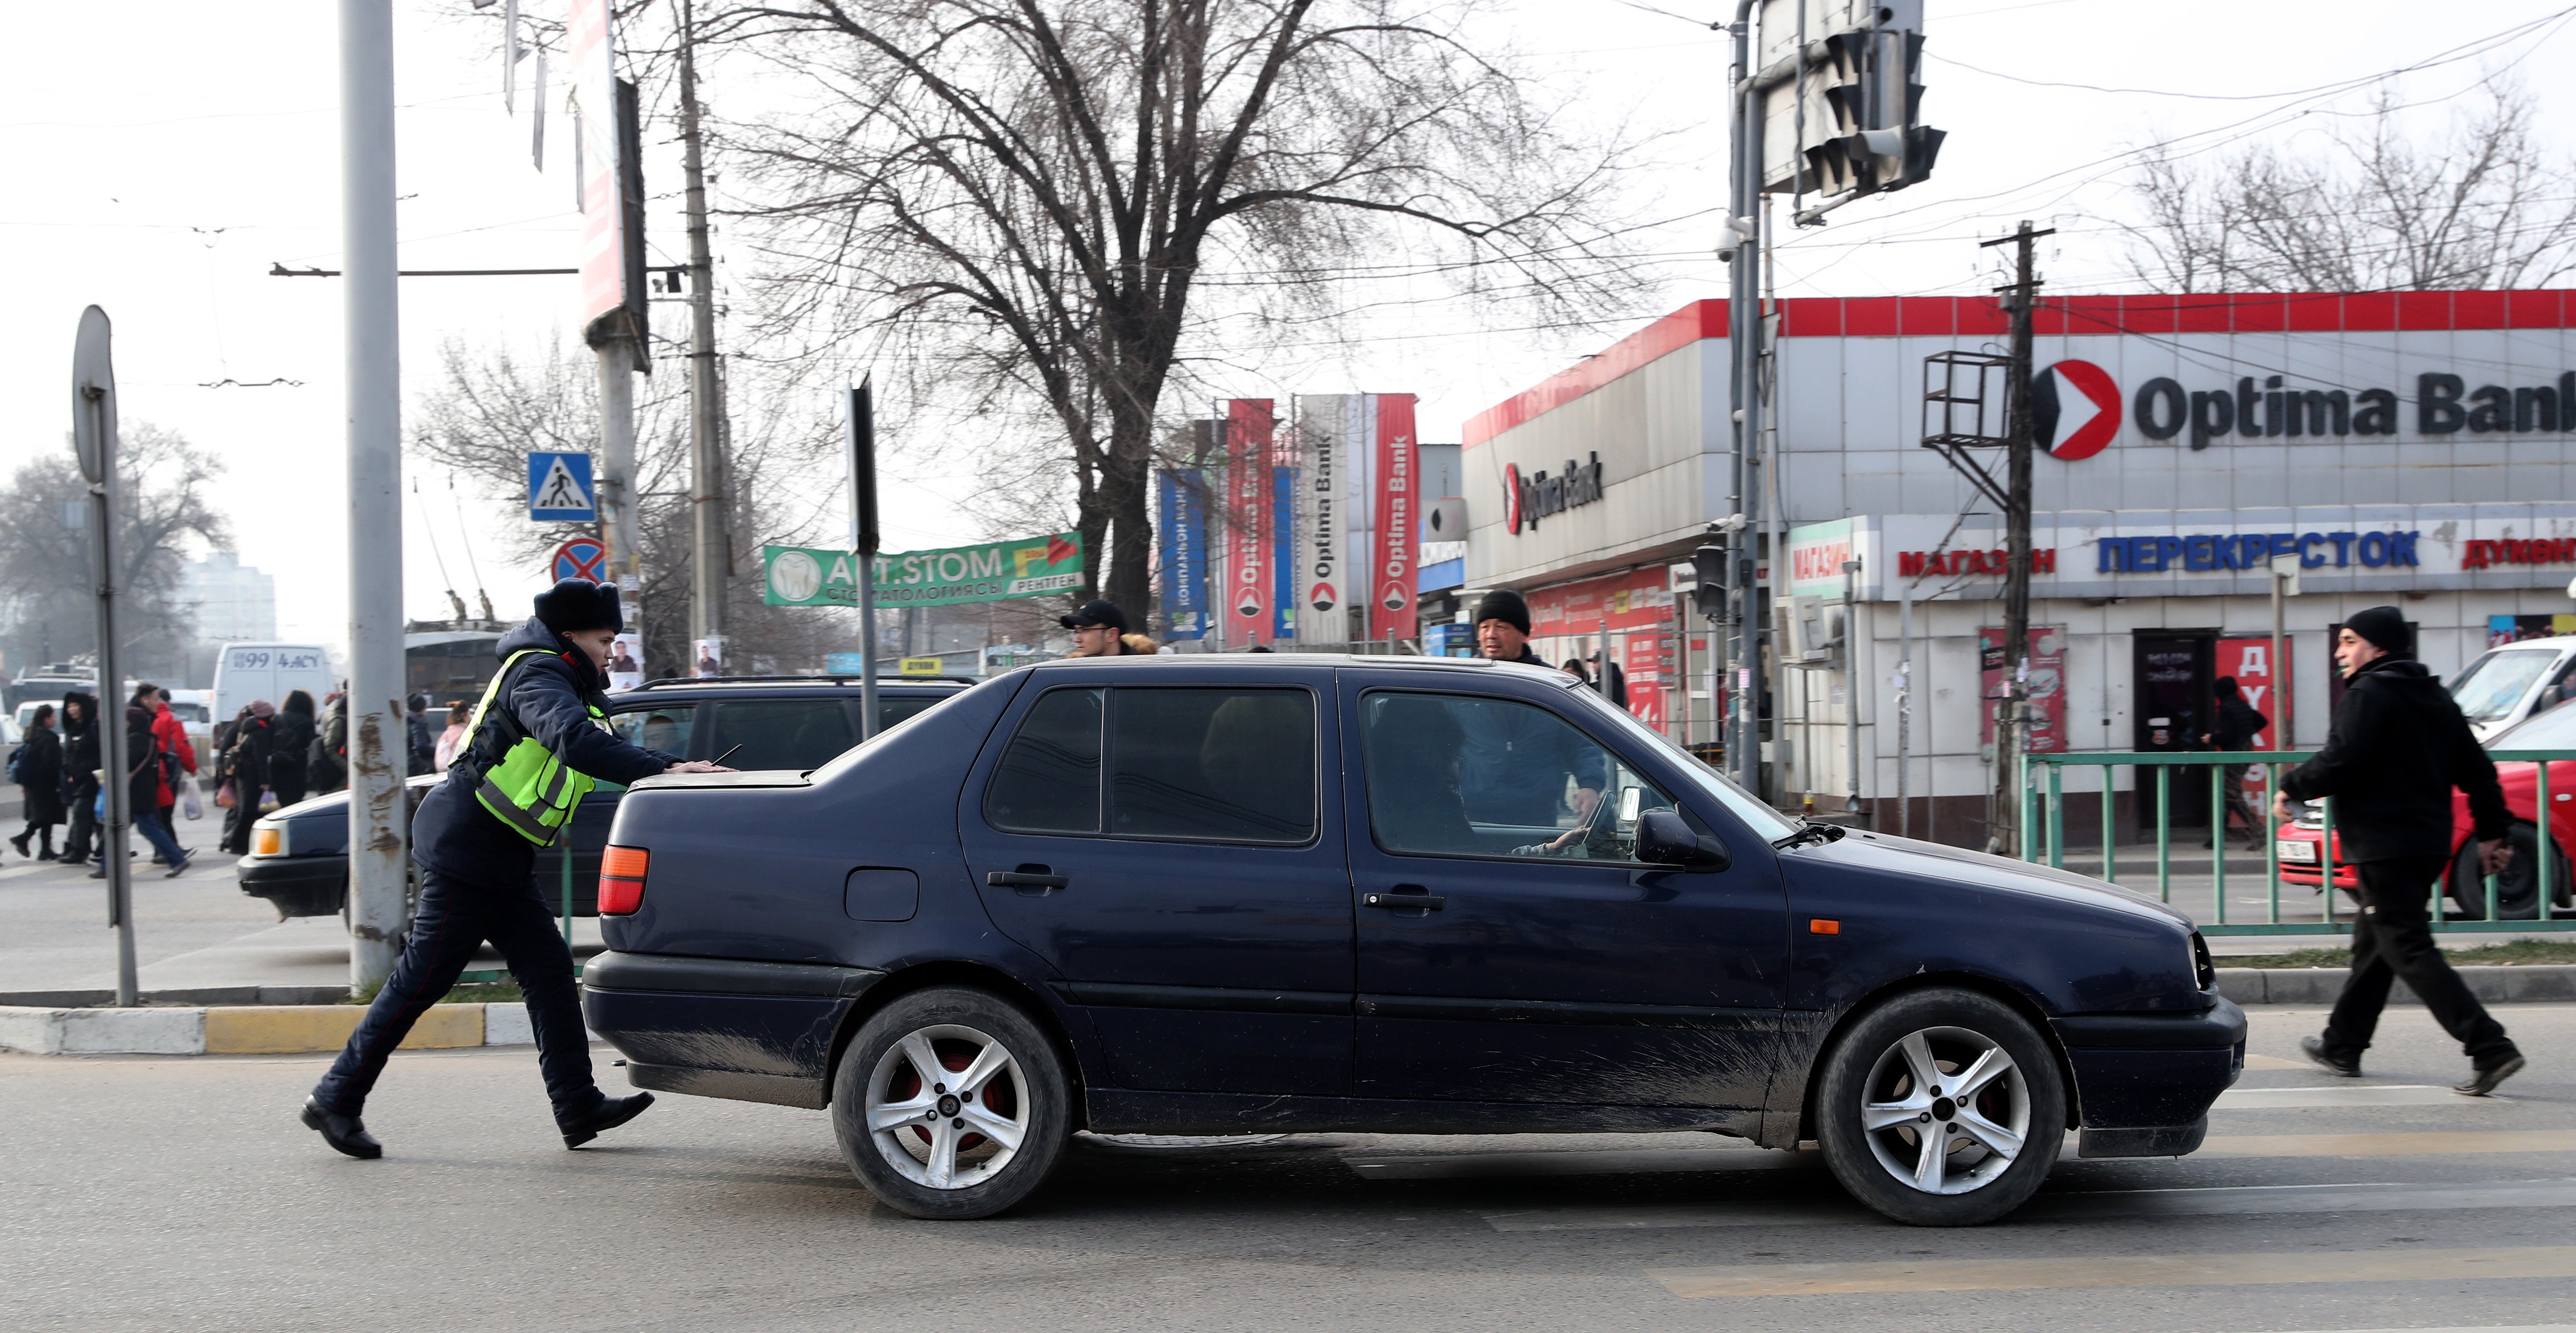 A policeman regulates traffic during a power outage in Bishkek, Kyrgyzstan, on 25 January 2022